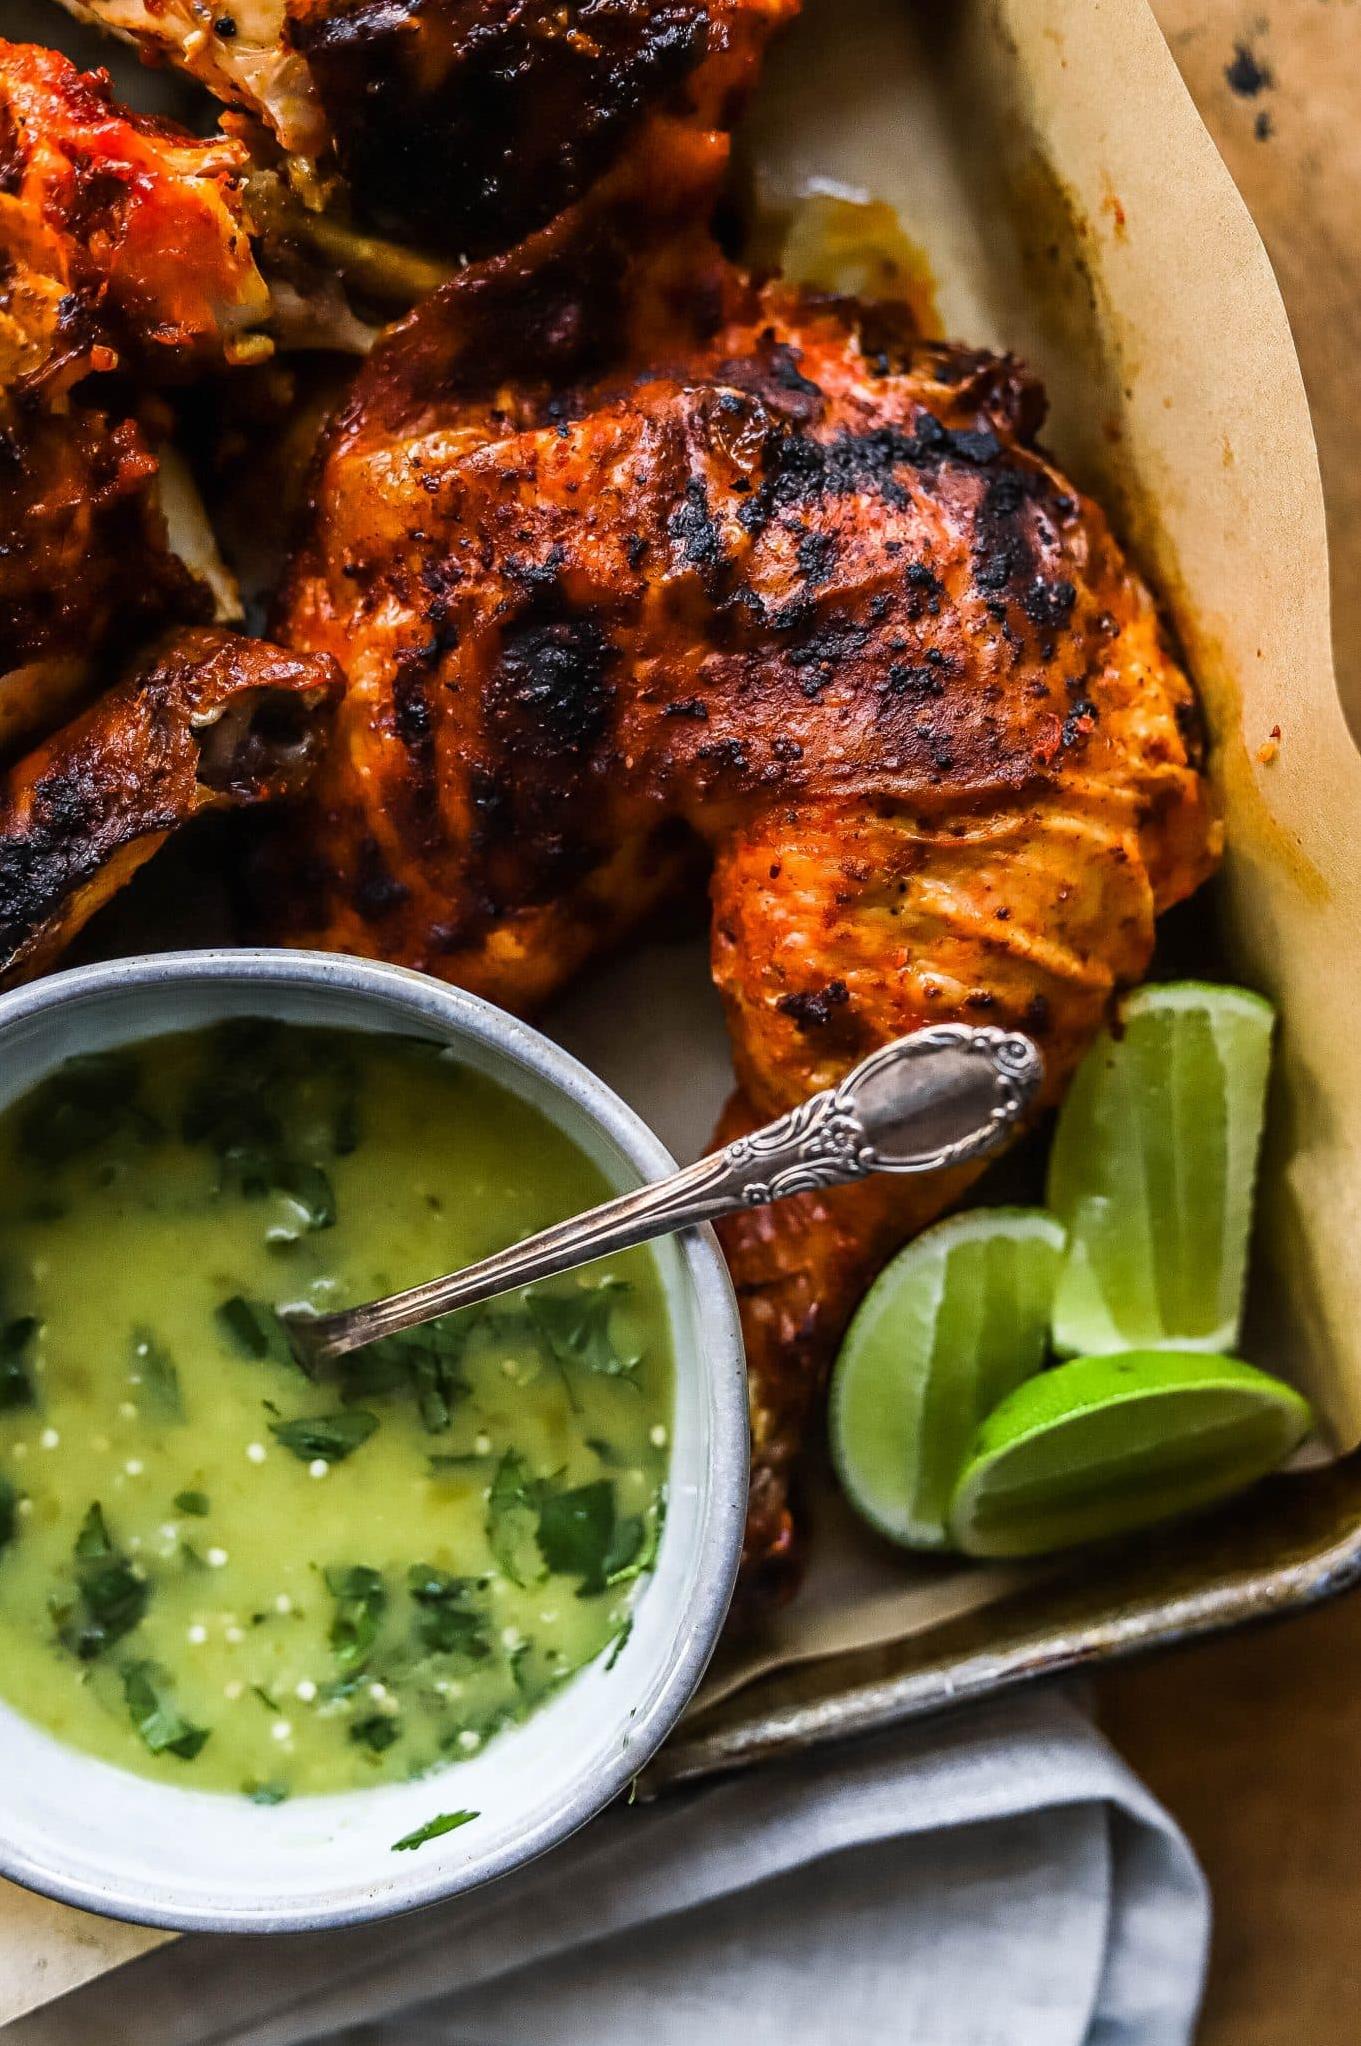  Fire up the grill and get ready for a taste of Brazil